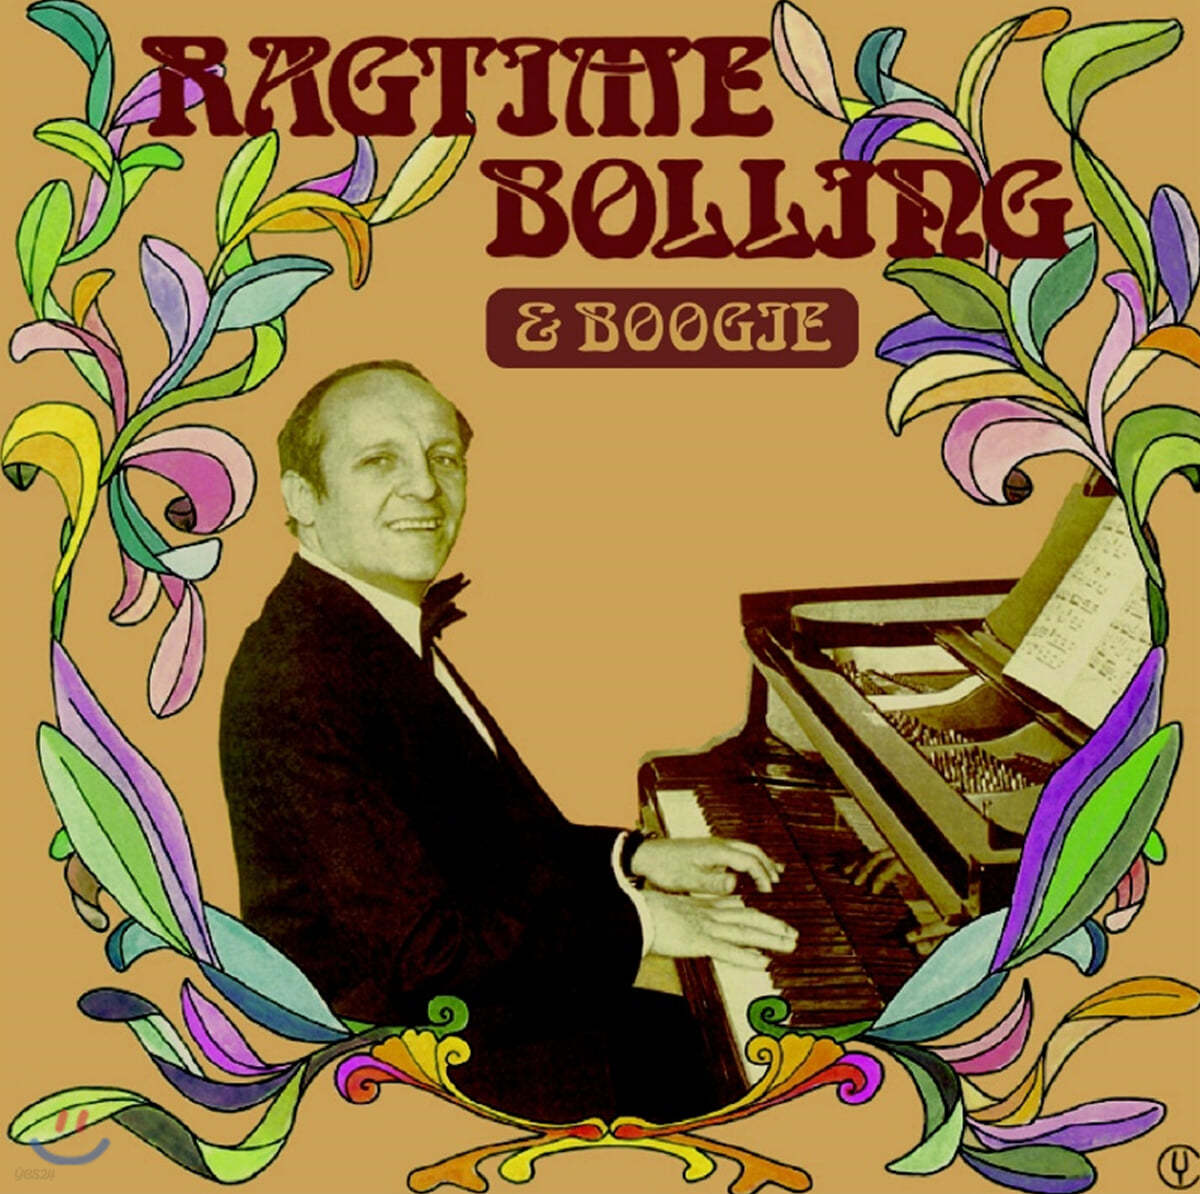 Claude Bolling (클로드 볼링) - Ragtime Bolling & Boogie